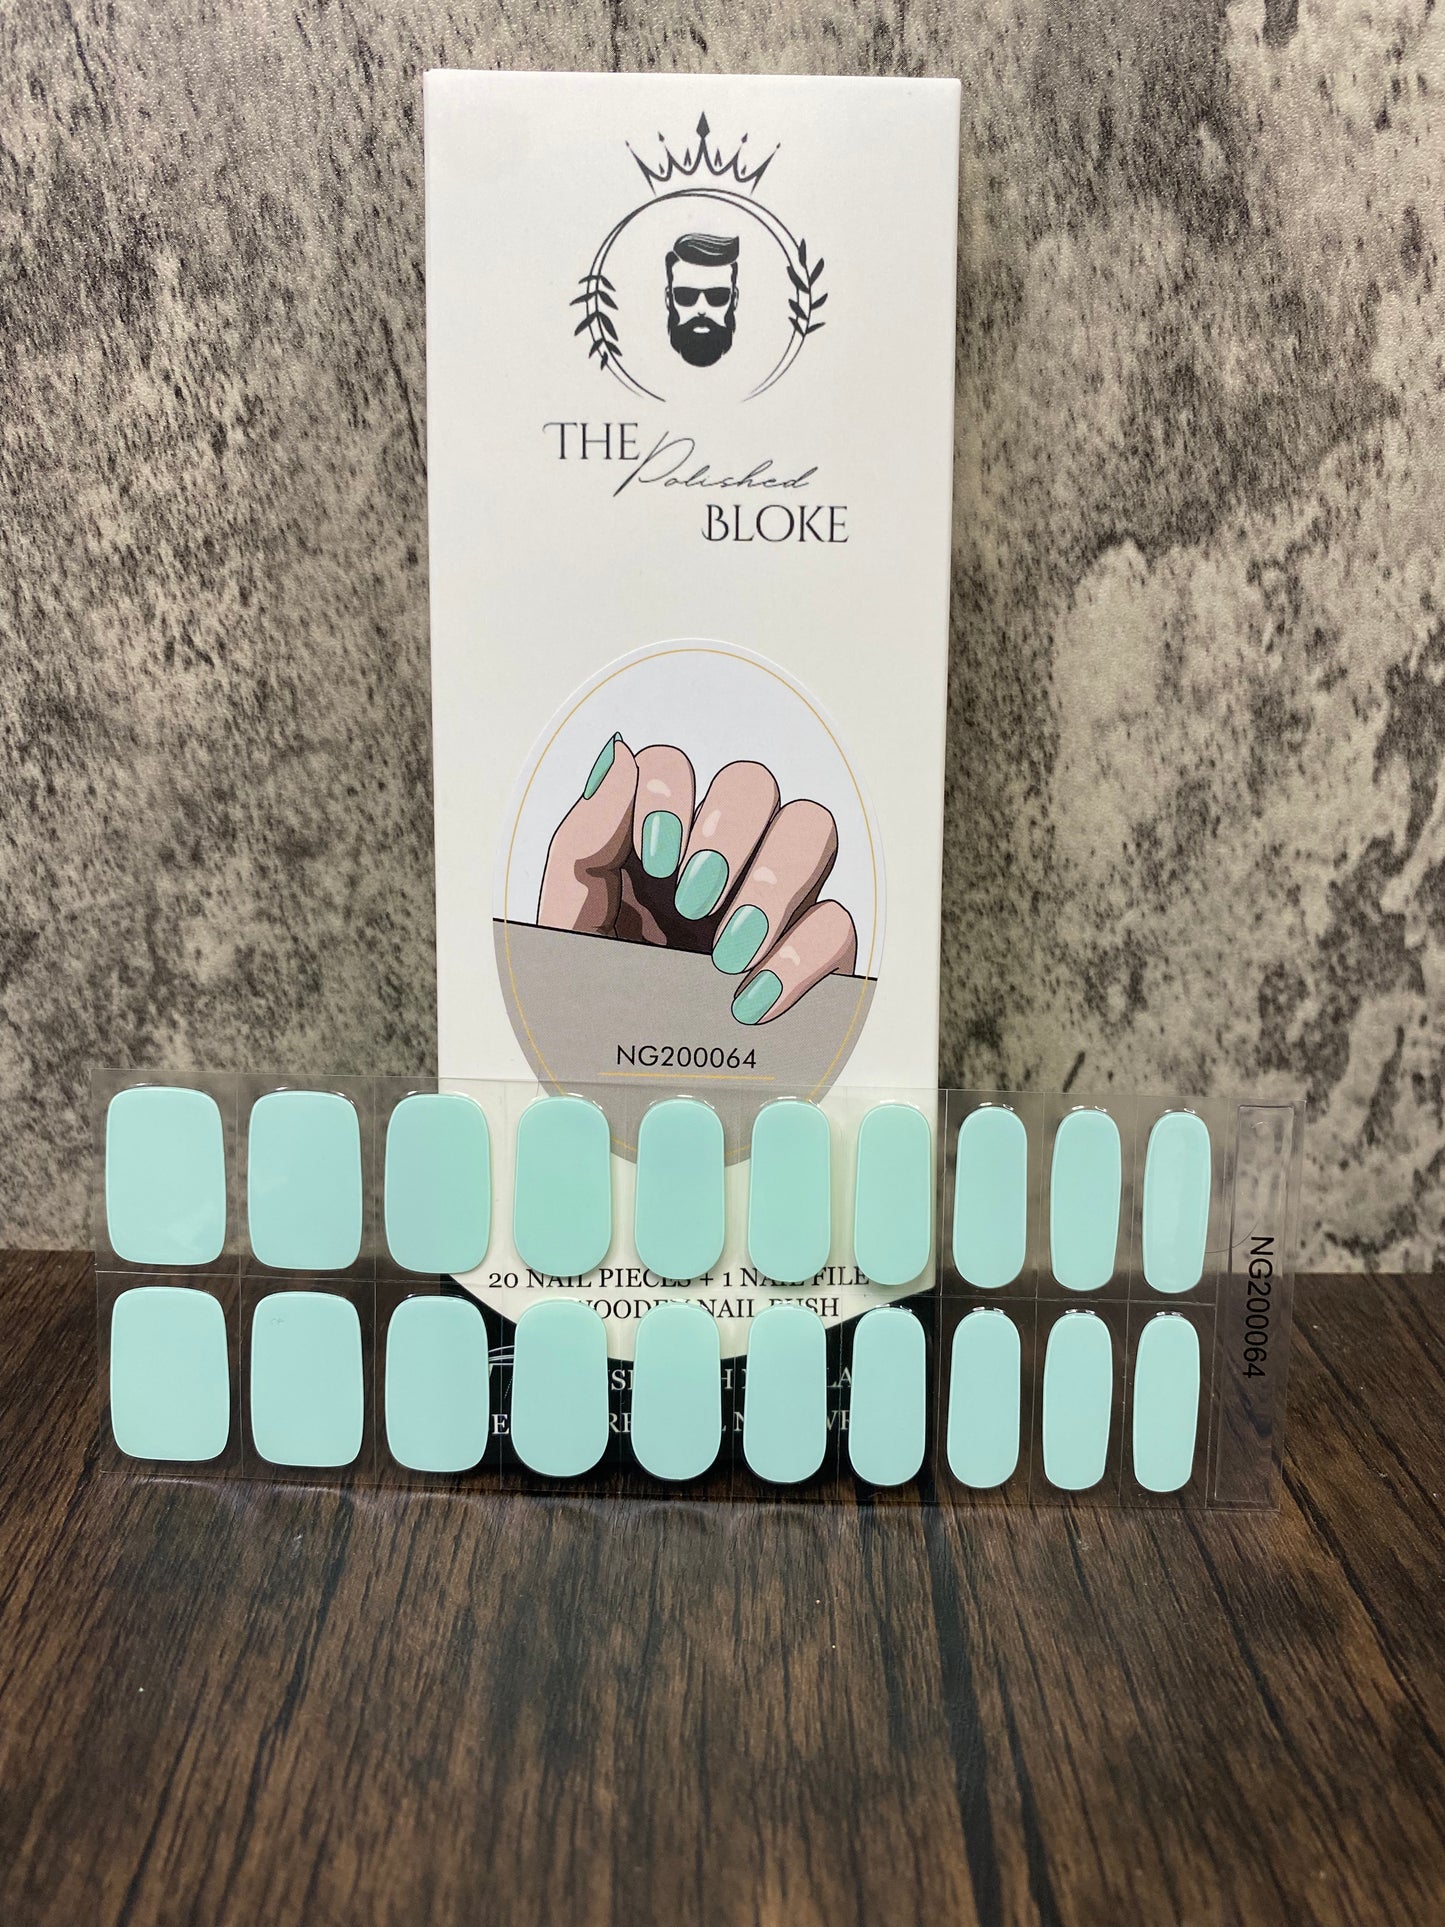 Instantly Gorgeous and Durable Nails with Semi-Cured Gel Nail Wraps